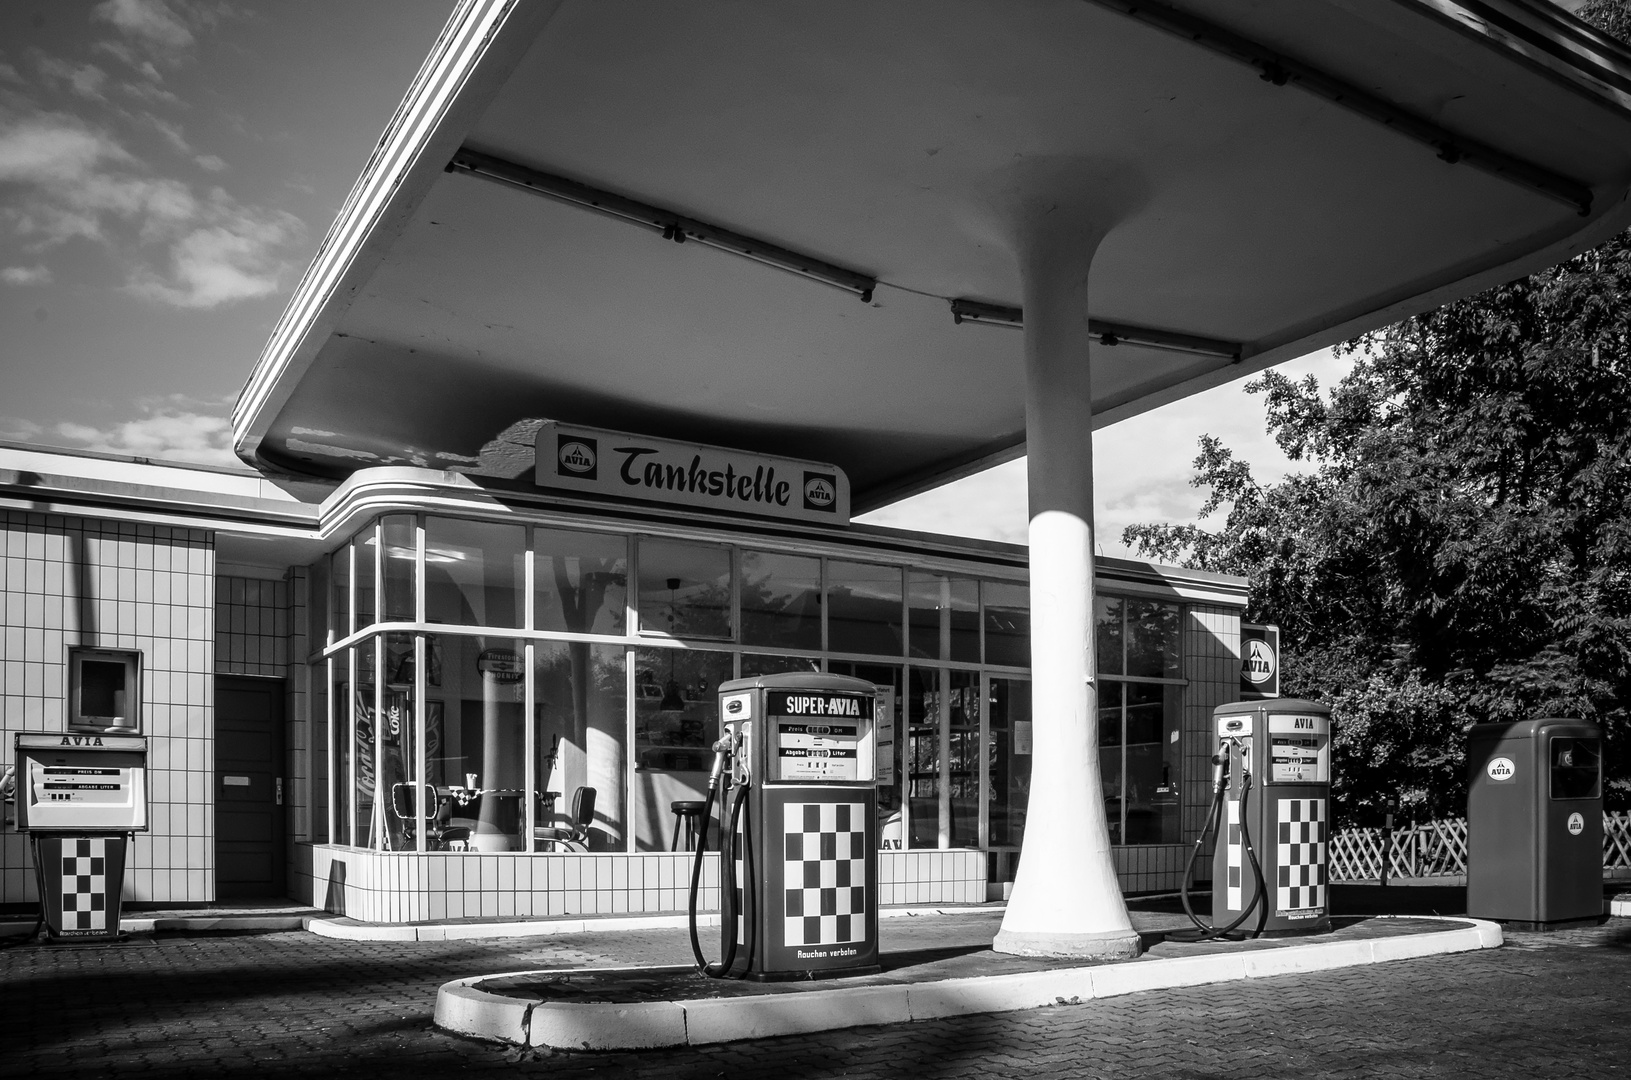 The 50's Filling Station - b/w